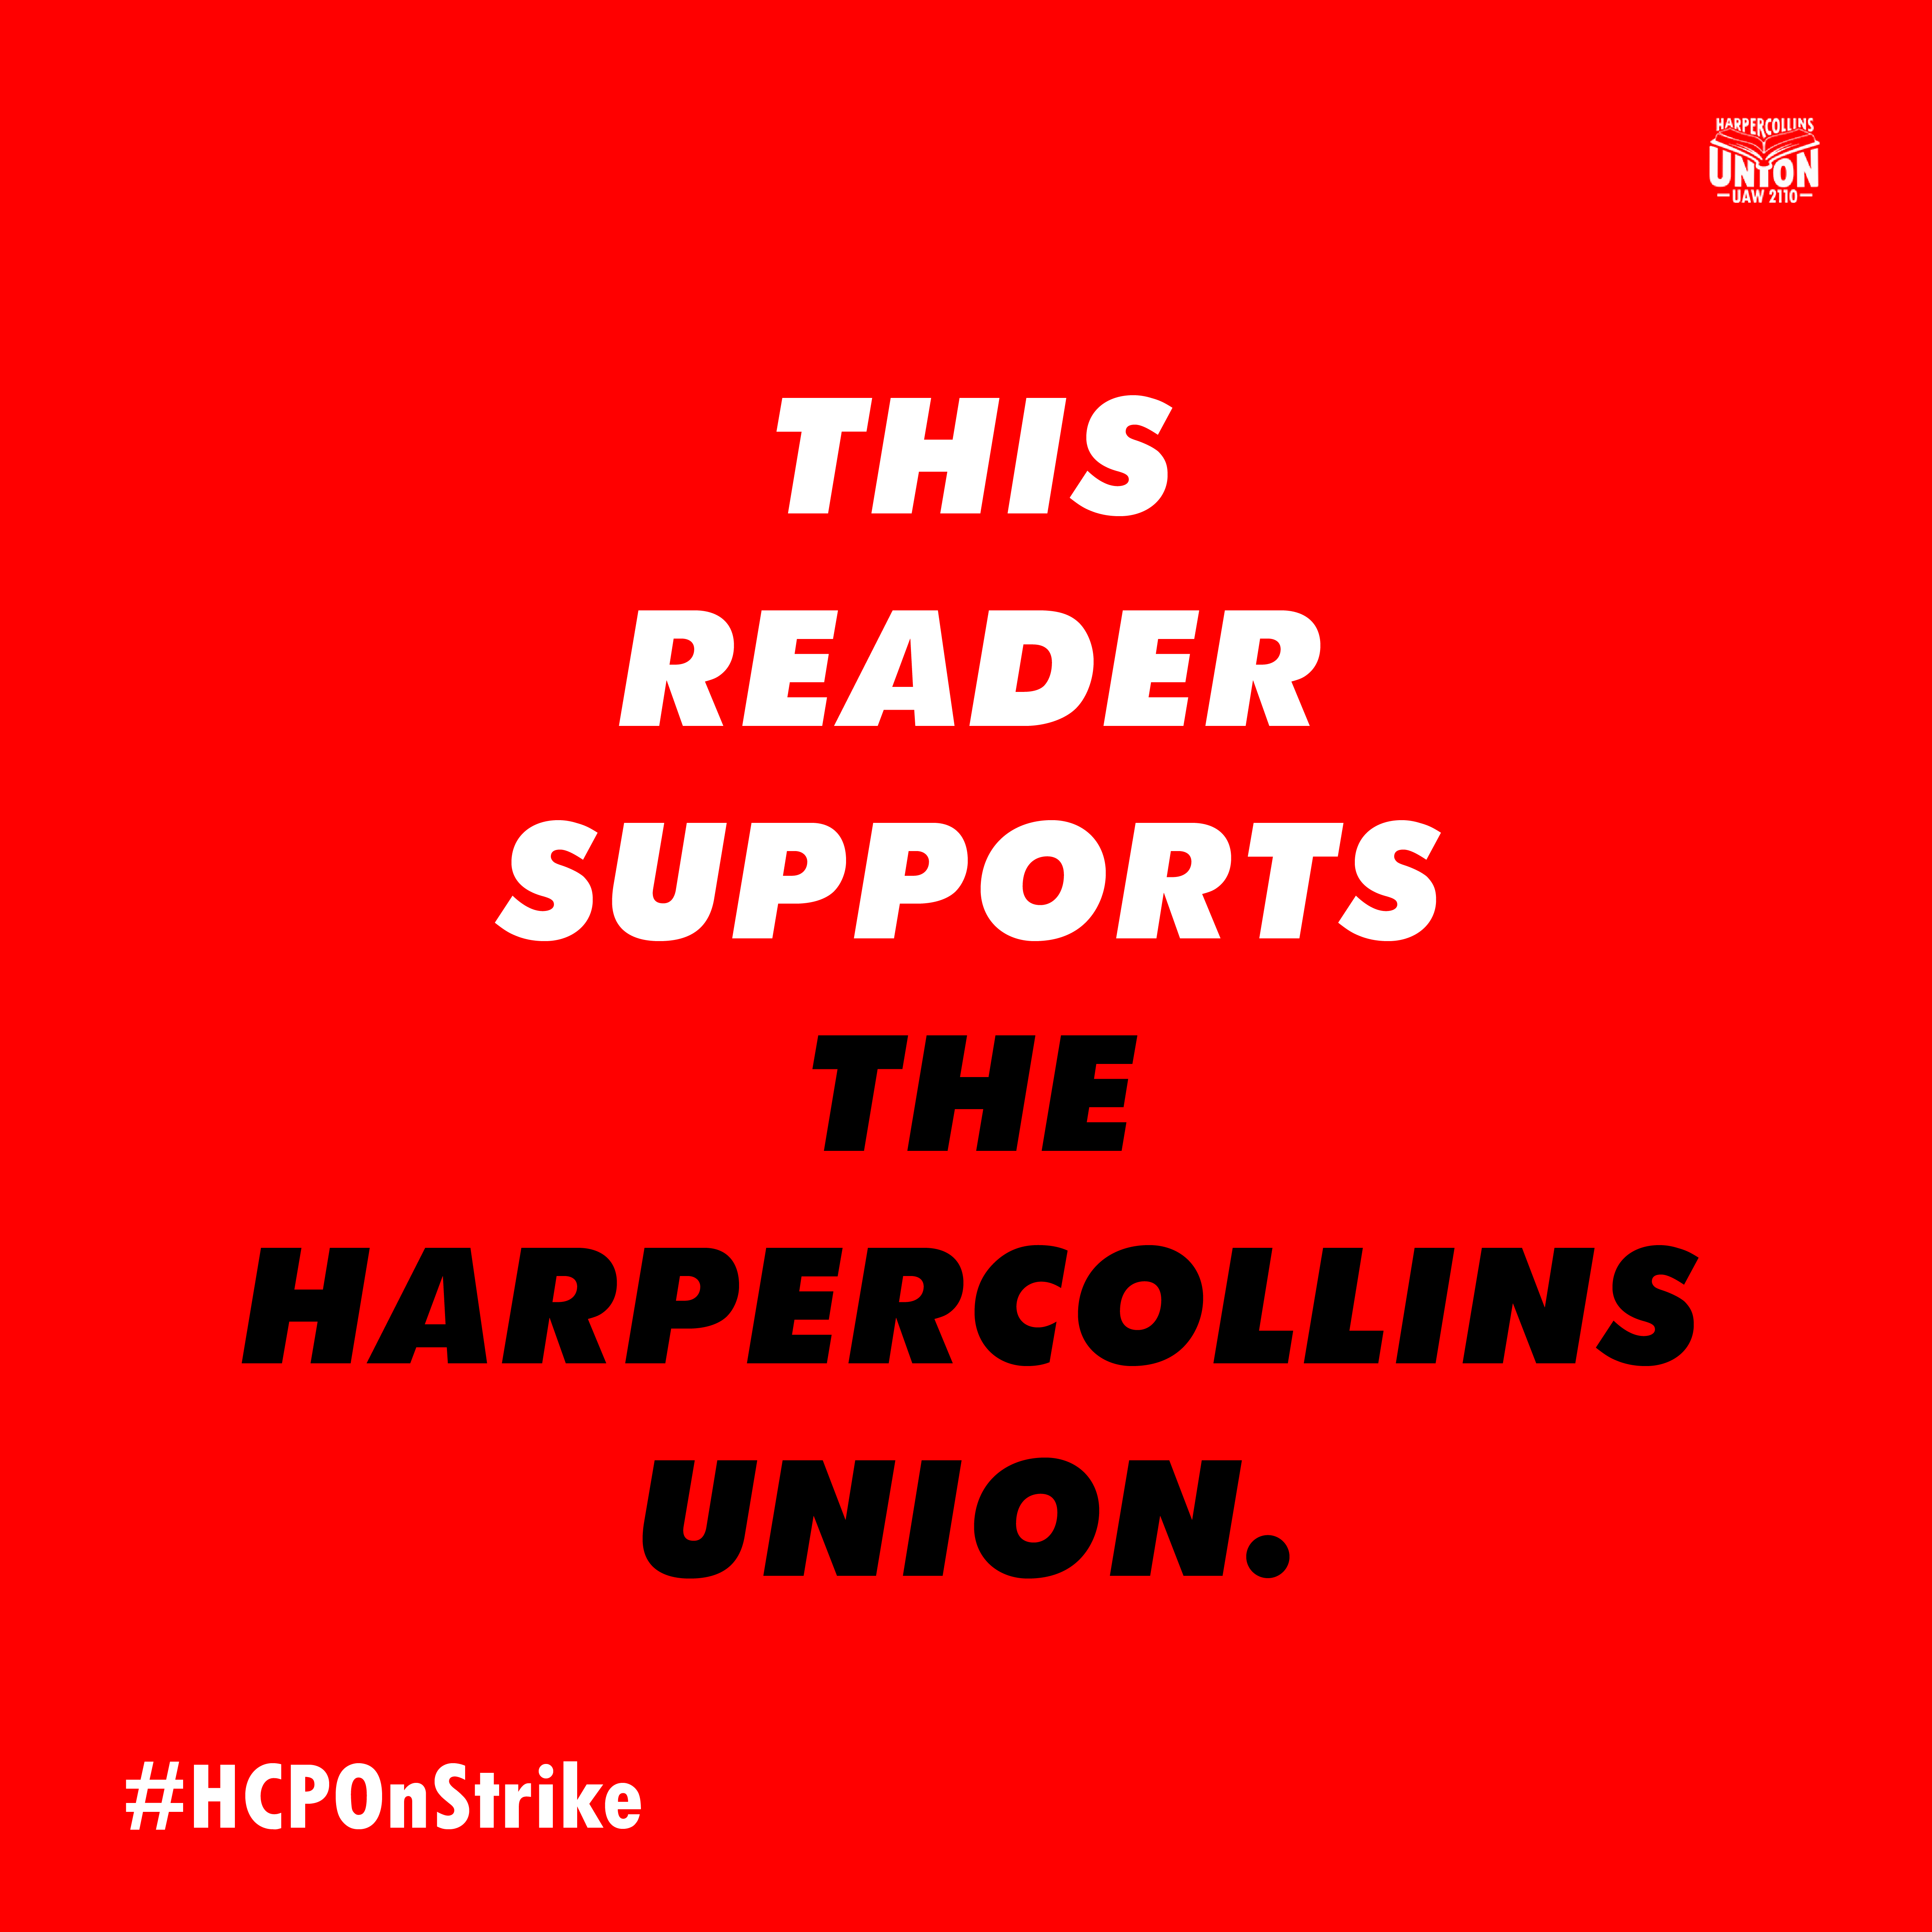 a graphic reading This Reader Supports the HarperCollins Union.